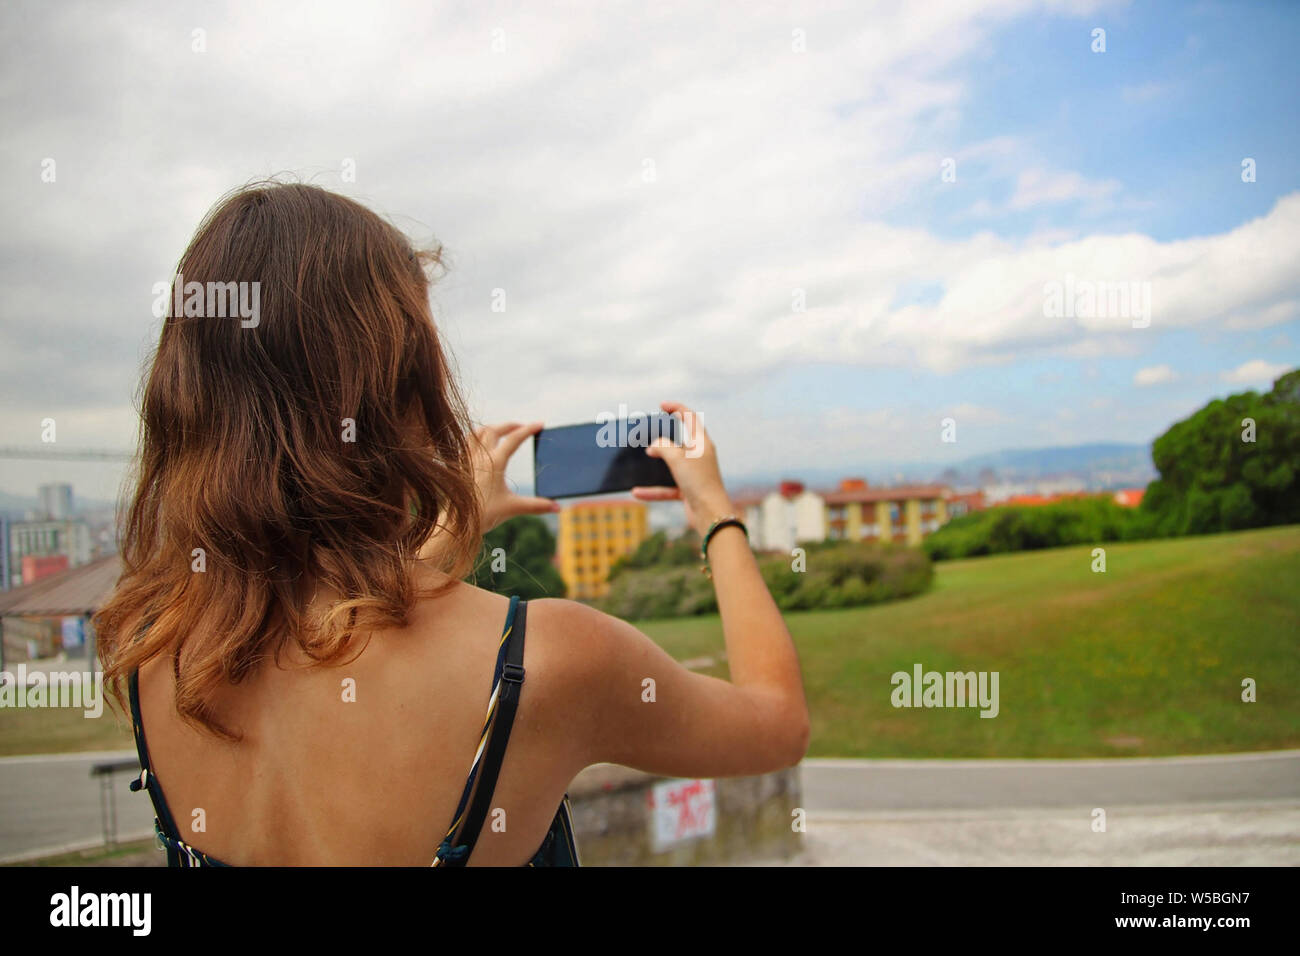 Young woman taking a picture of the landscape. Stock Photo